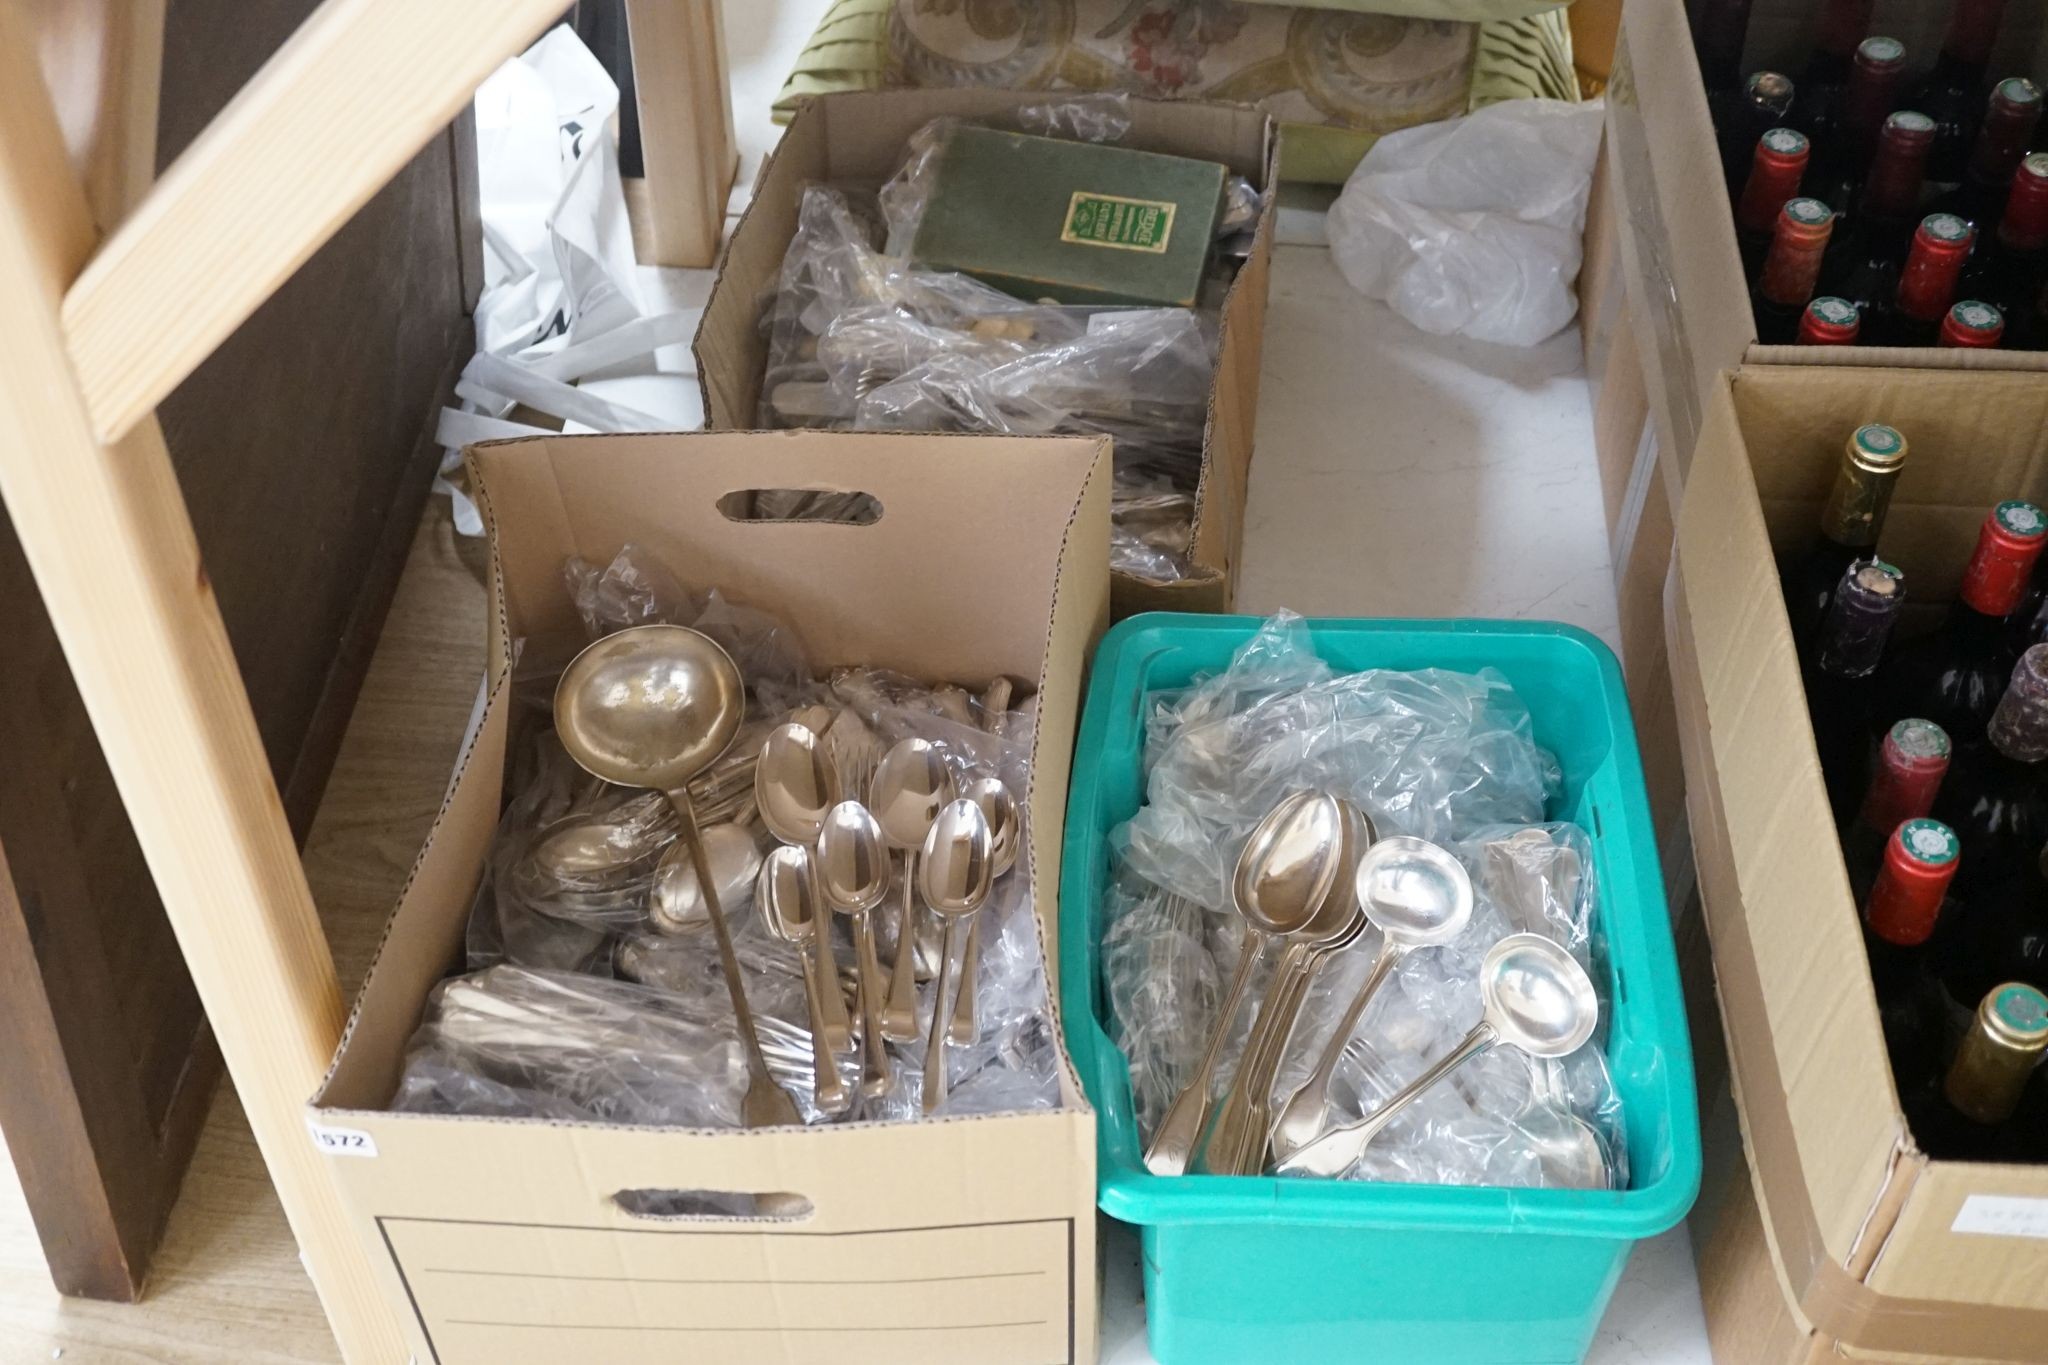 A large quantity of silver plated flatware